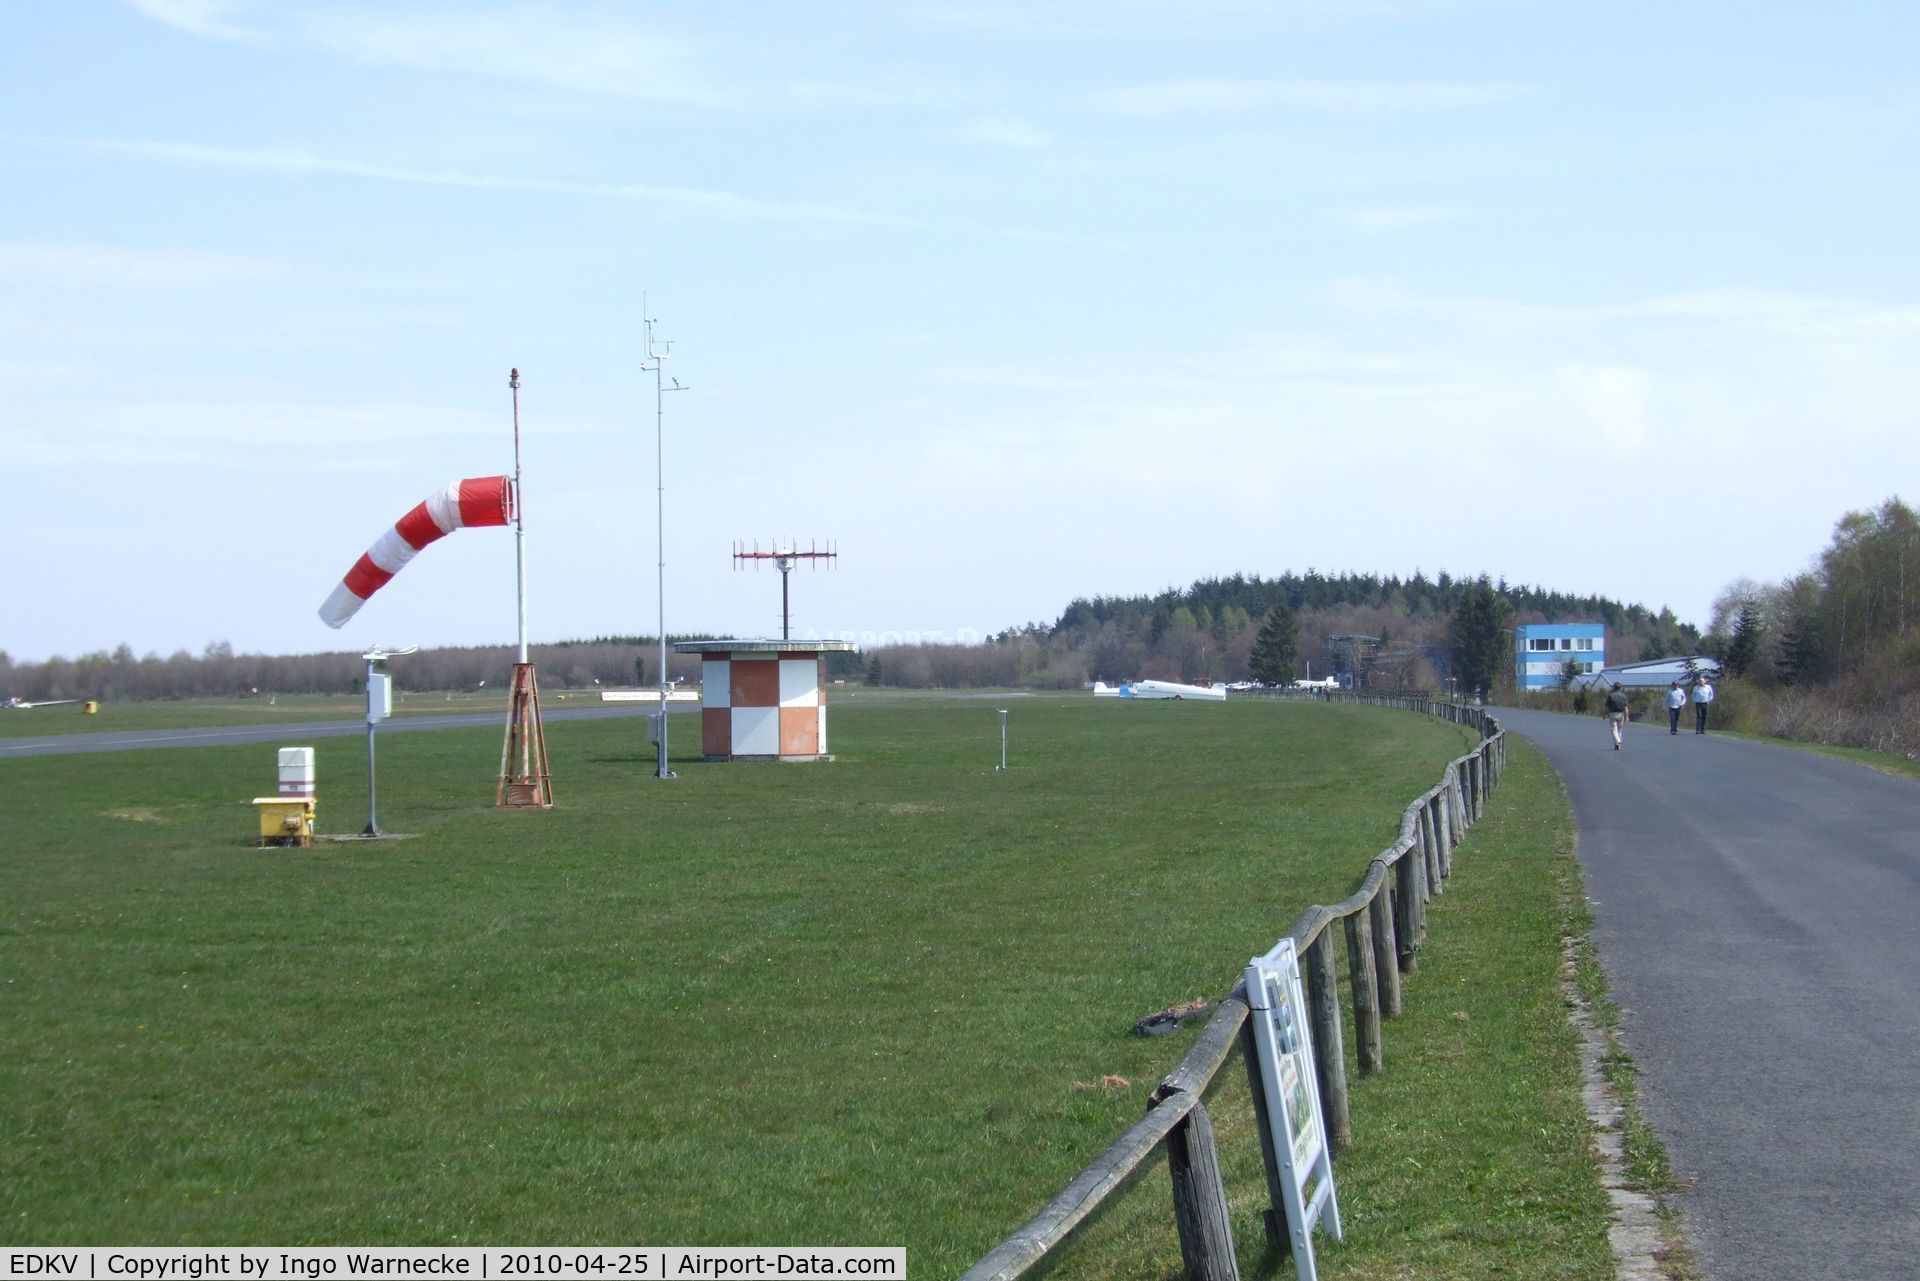 Dahlemer Binz Airport, Dahlem Germany (EDKV) - looking east from the western end of the public viewing area